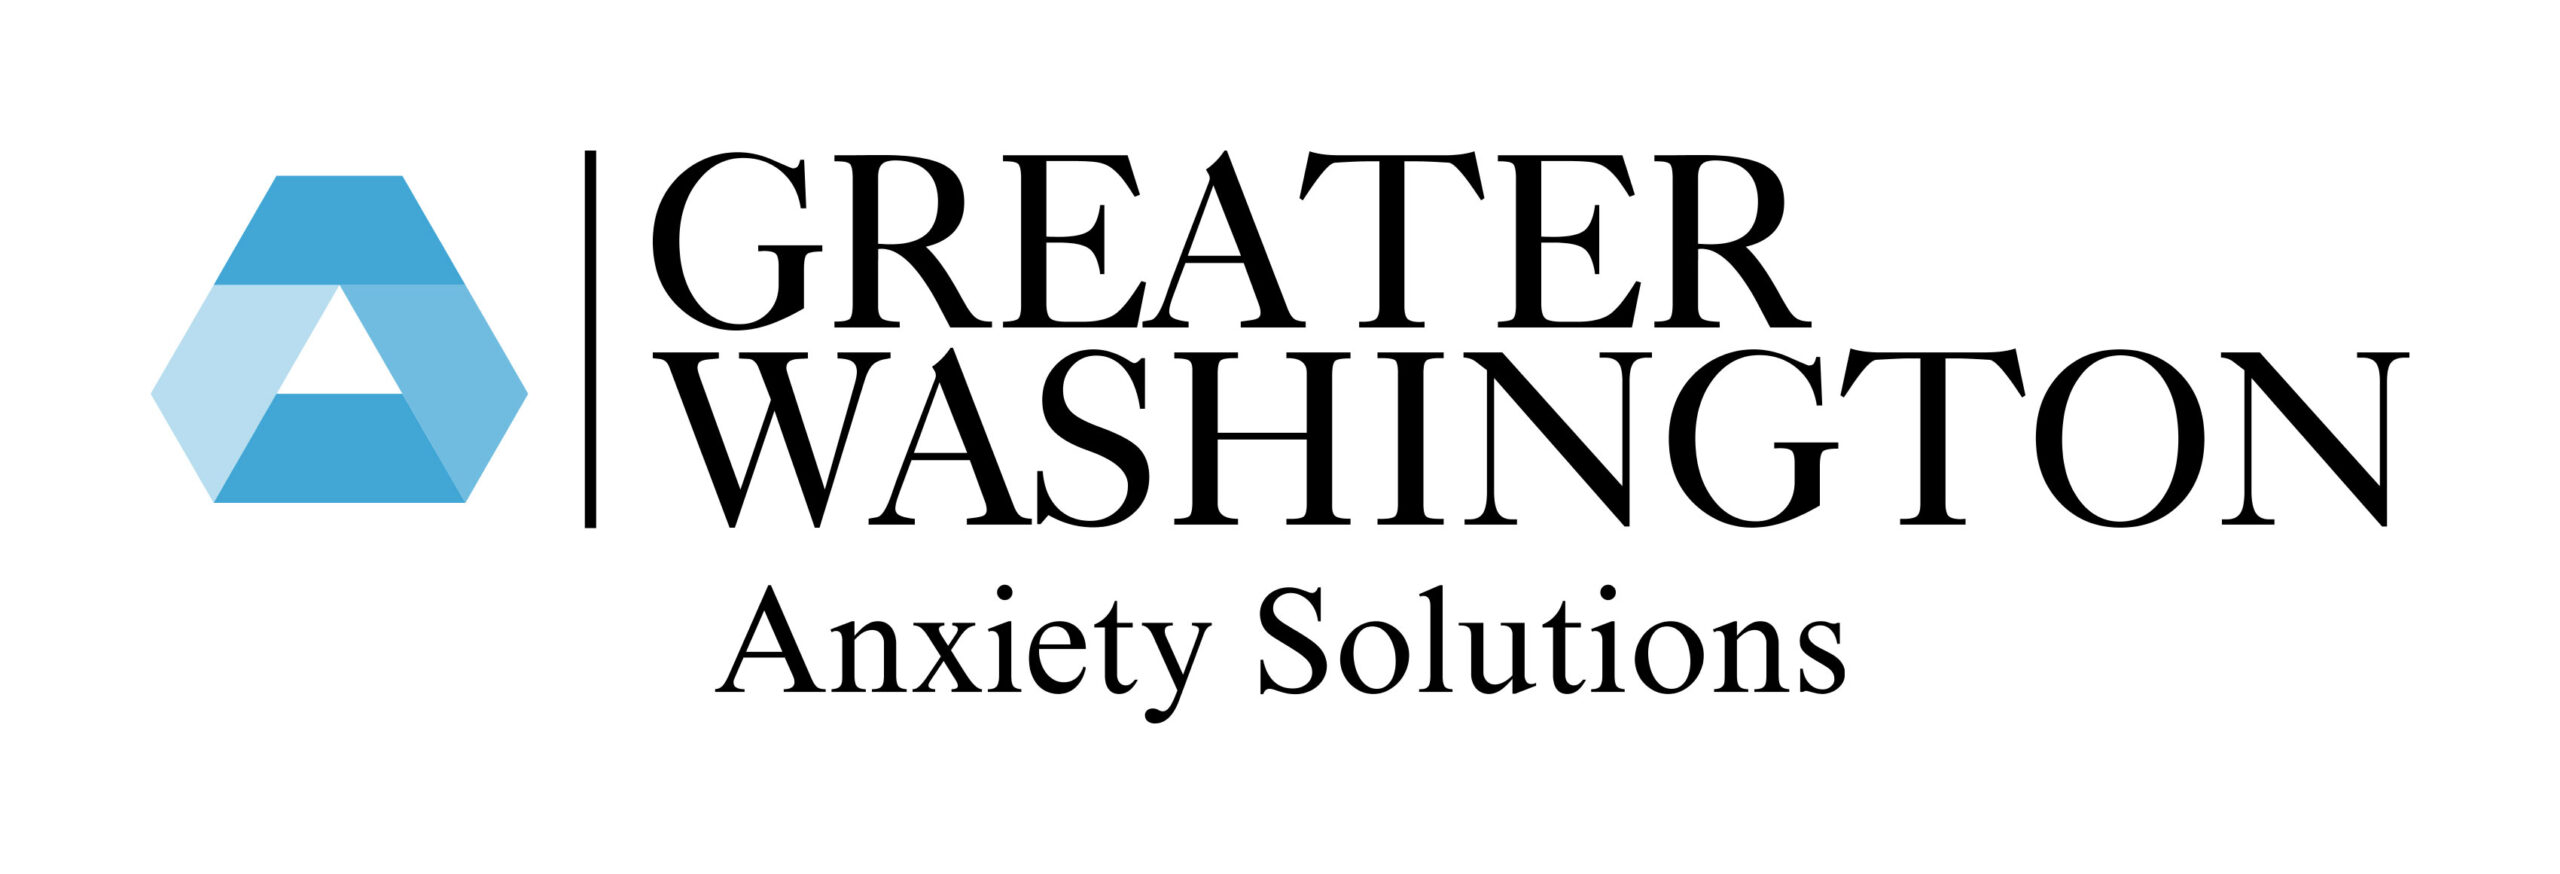 Greater Washington Anxiety Solutions